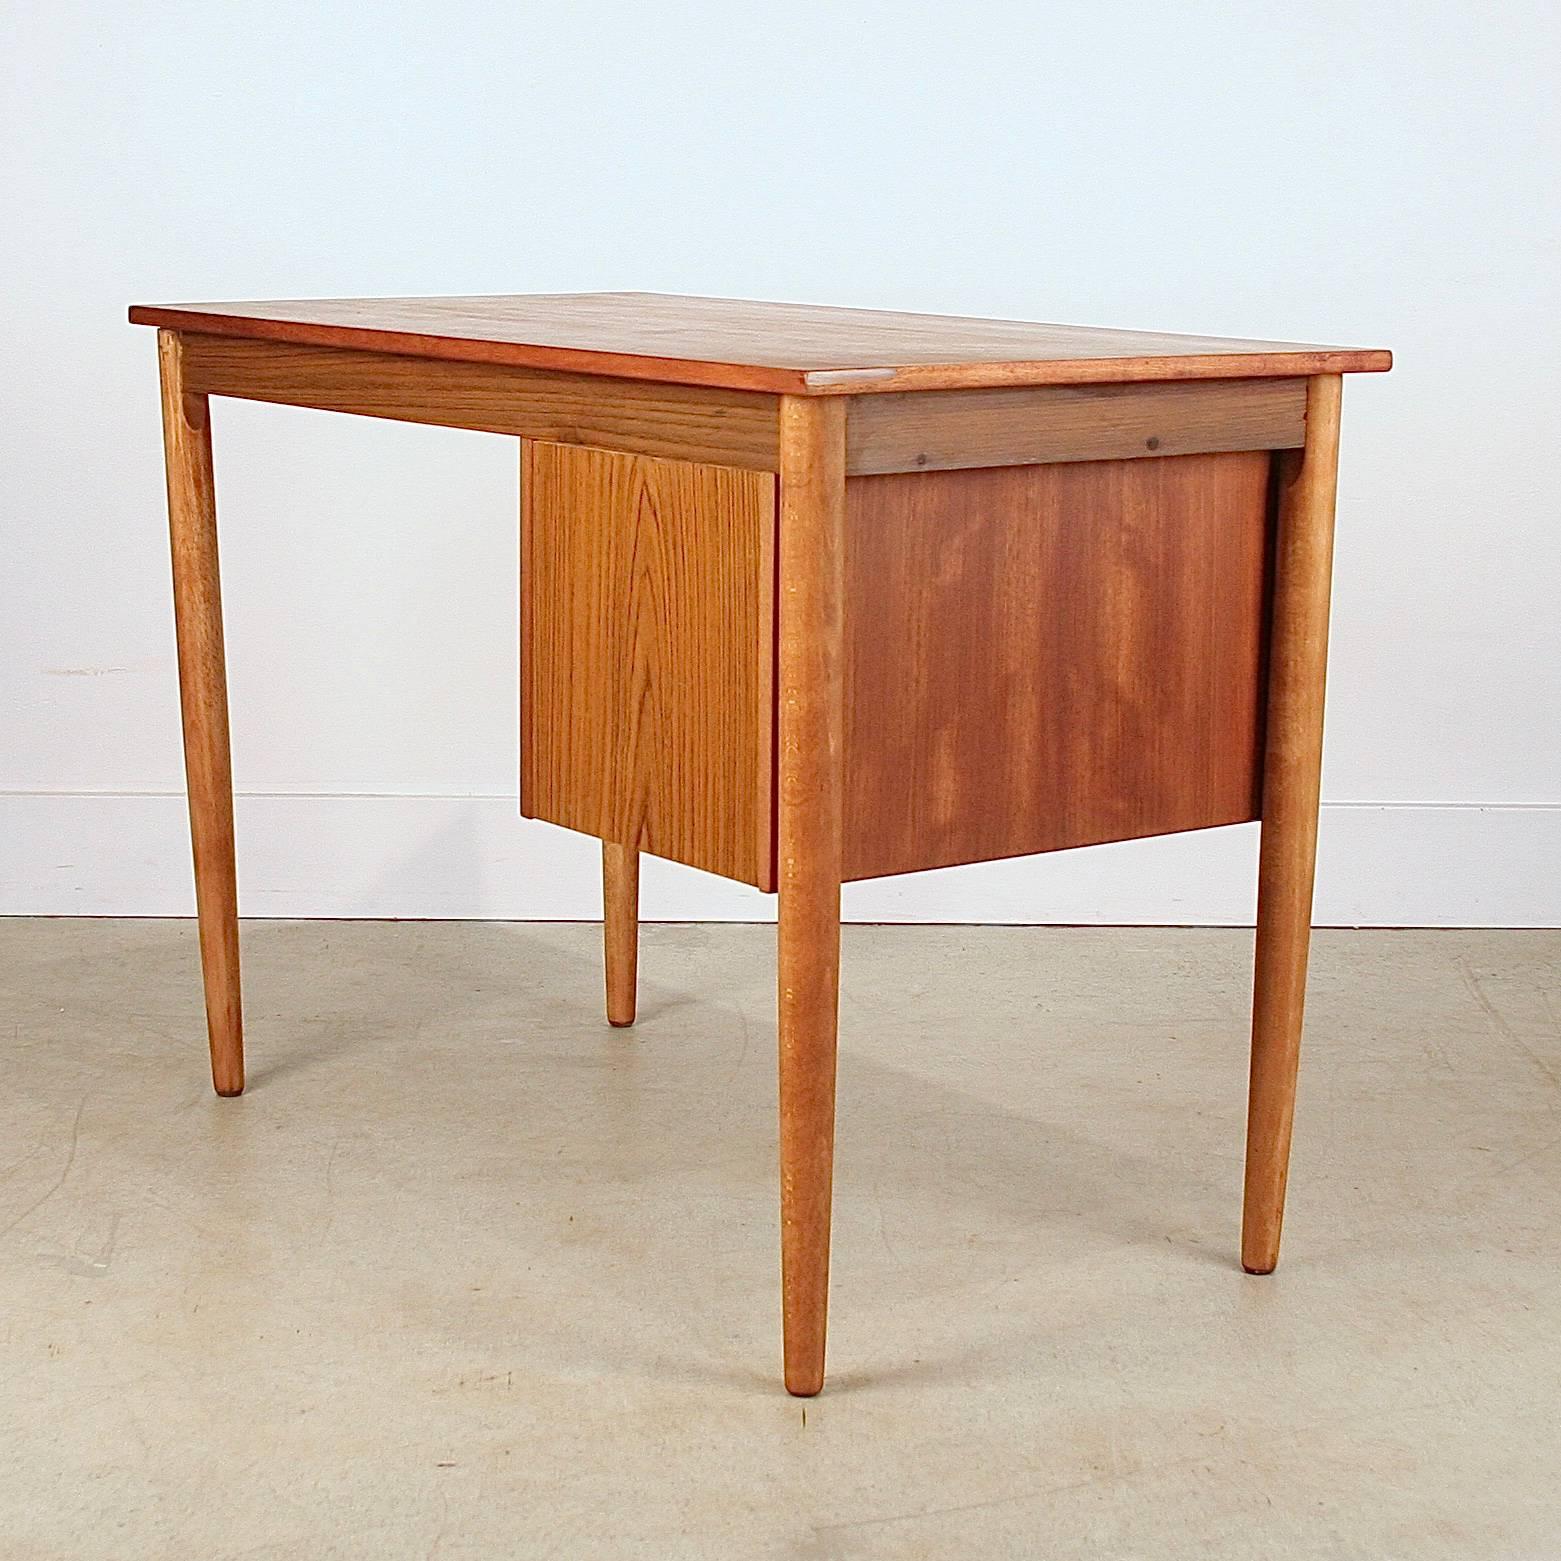 Vintage Danish teak writing desk featuring three drawers with lip pulls. Made in Denmark.
 